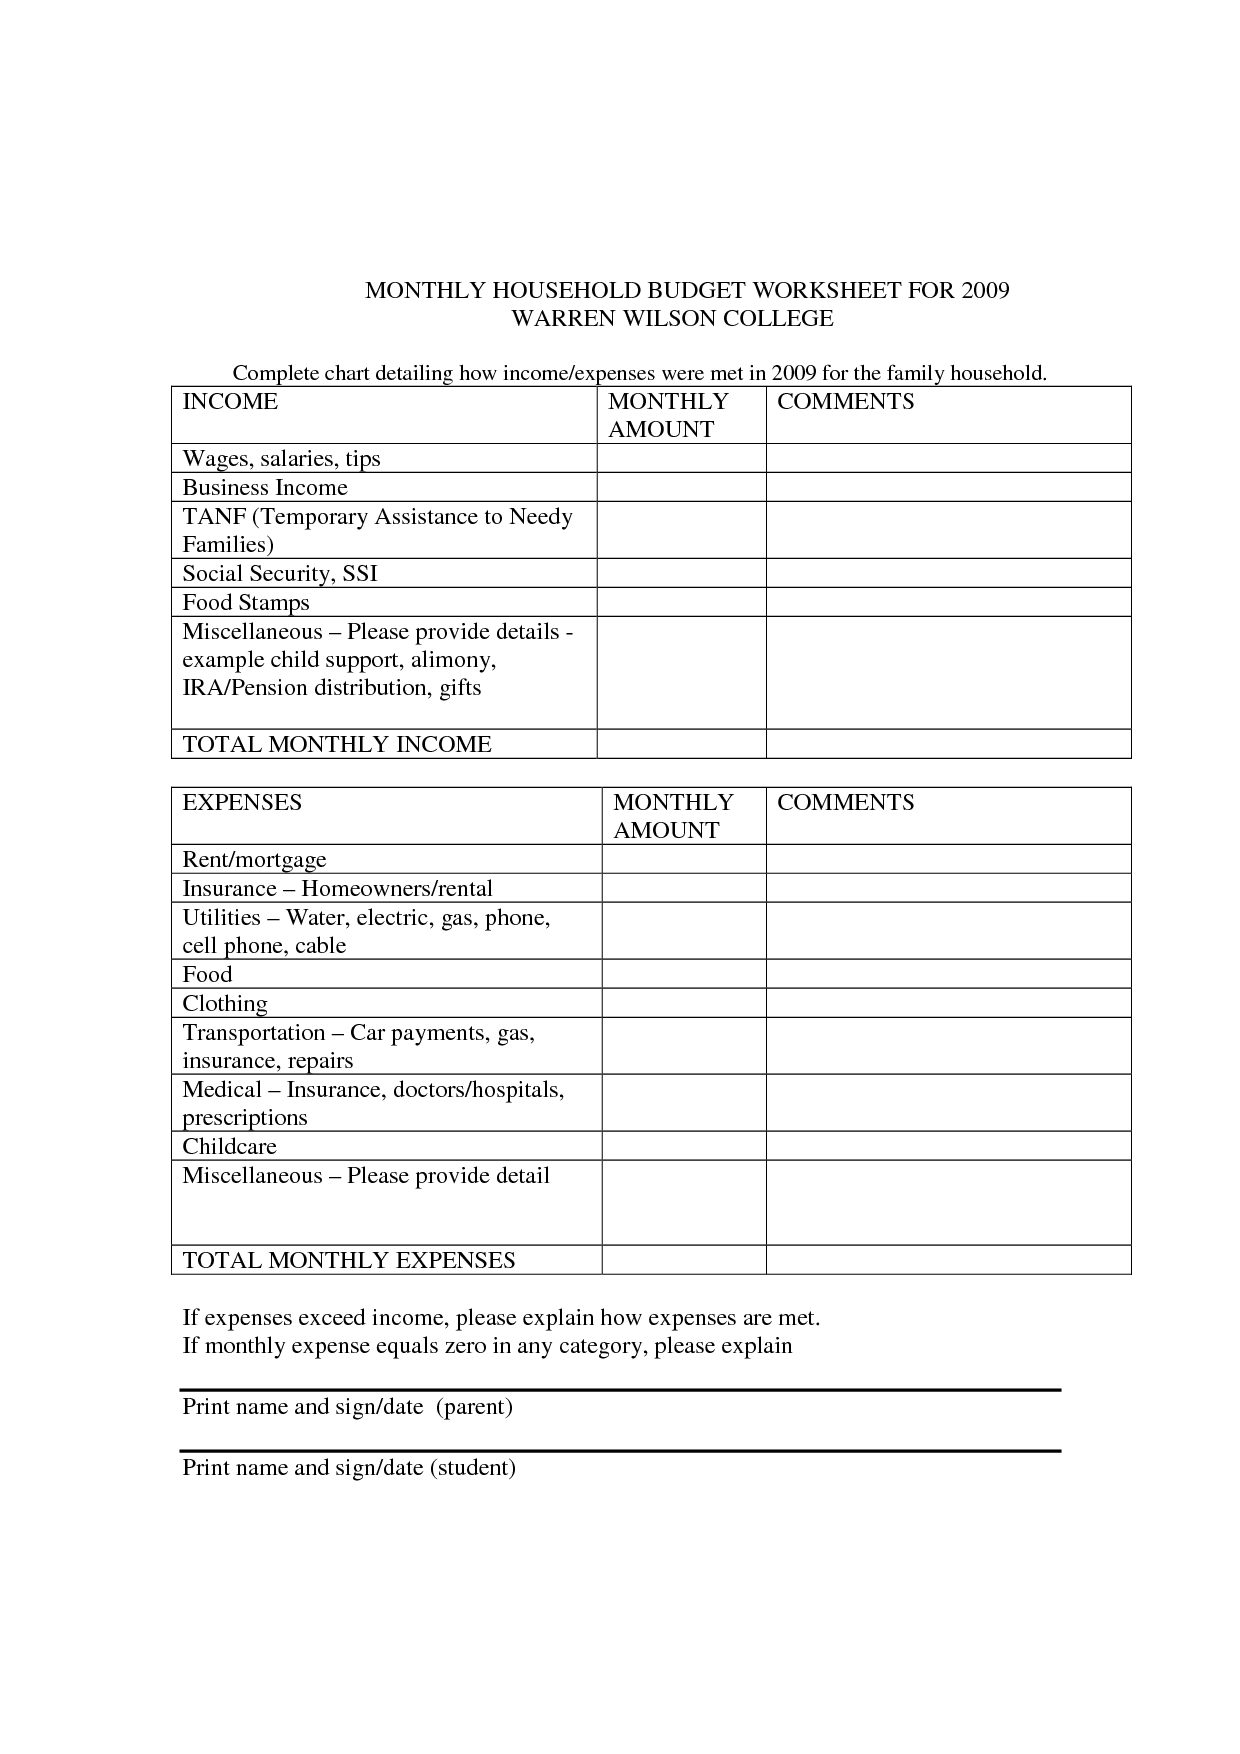 Monthly Household Budget Worksheet Image